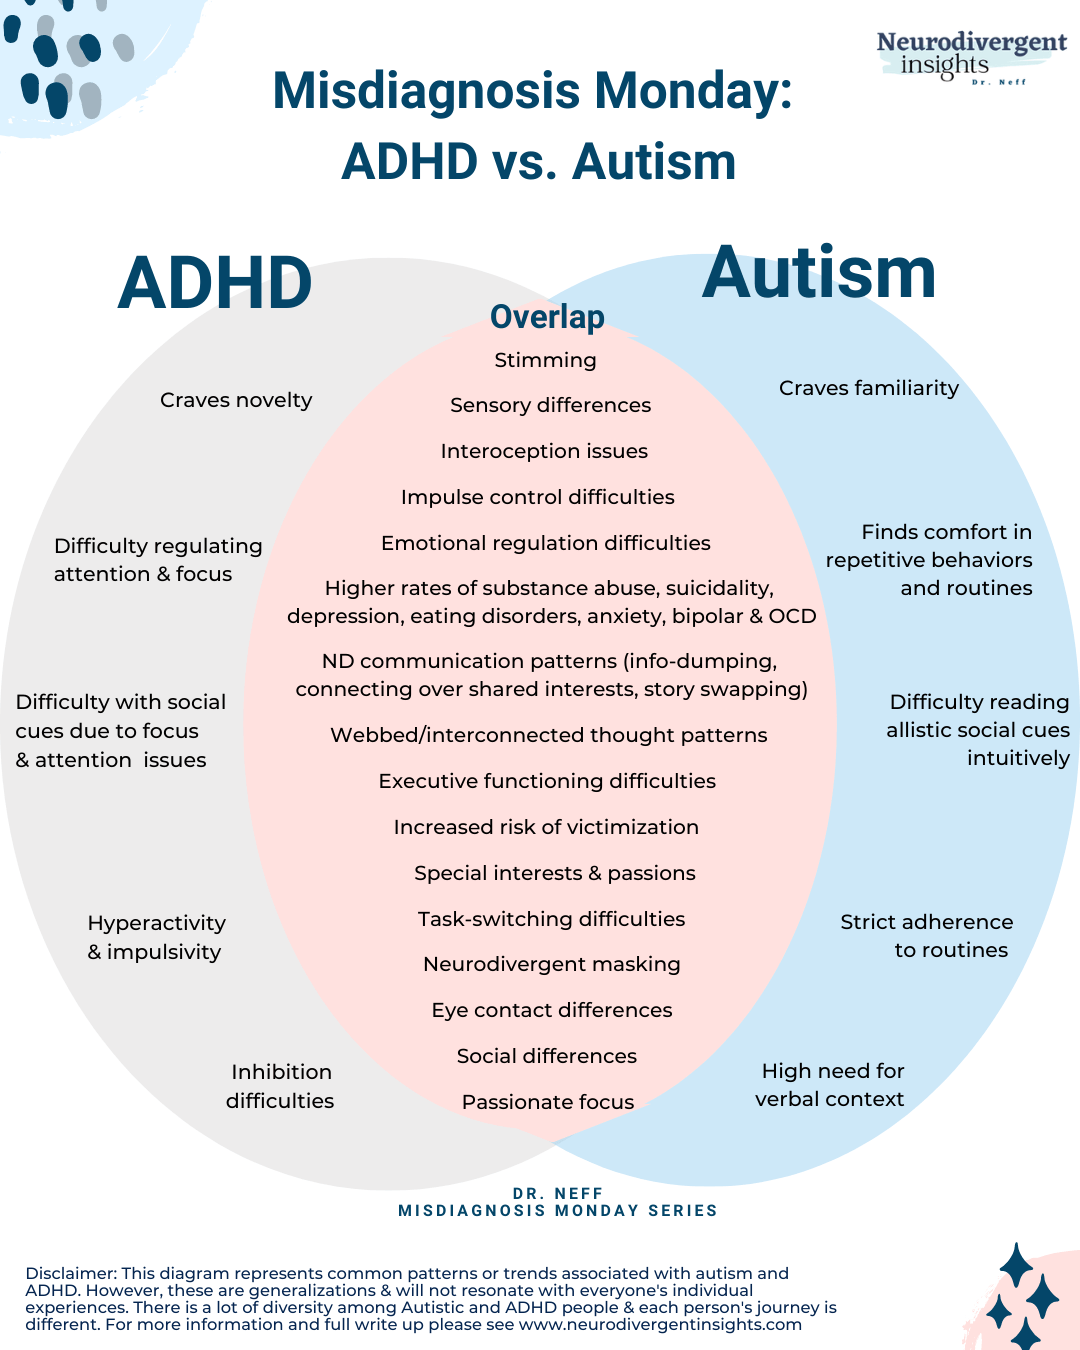 ADHD or Autism?